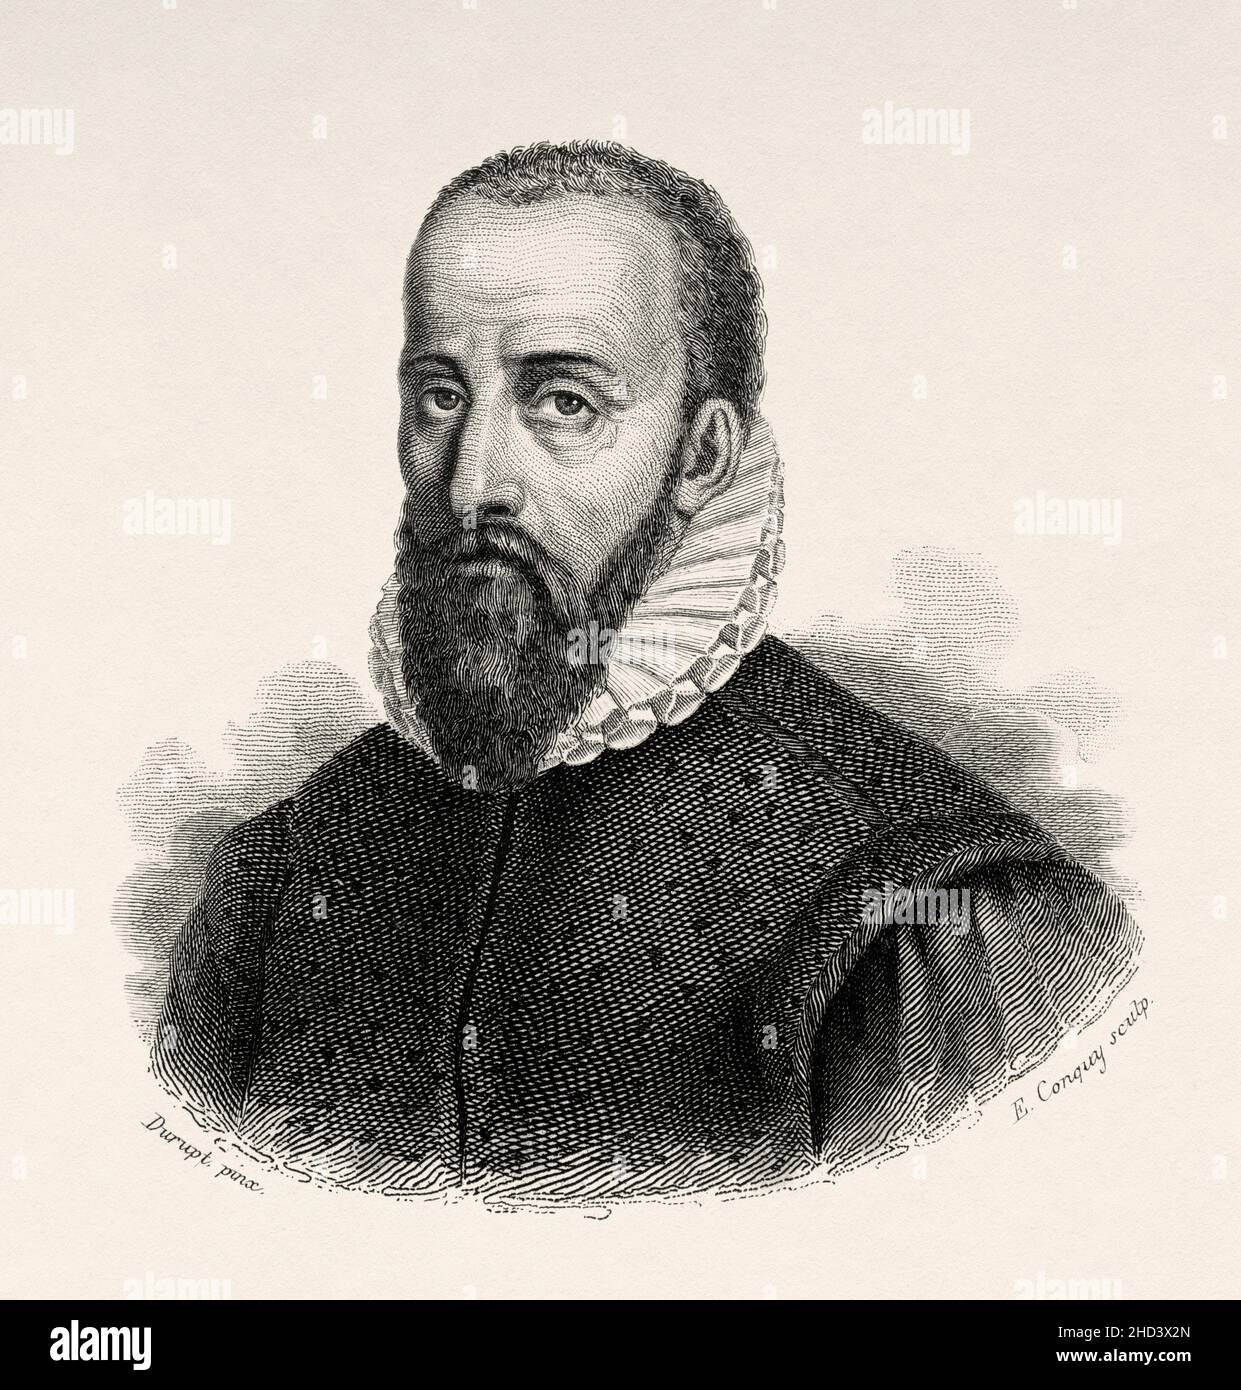 Ambroise Paré (1510-1590) was a French barber surgeon who served for kings Henry II, Francis II, Charles IX and Henry III. He is considered one of the fathers of surgery and modern forensic pathology and a pioneer in surgical techniques and battlefield medicine, especially in the treatment of wounds. He was also an anatomist, invented several surgical instruments, and was a member of the Parisian barber surgeon guild. France. Europe. Old 19th century engraved illustration from Portraits et histoire des hommes utile by Societe Montyon et Franklin 1837 Stock Photo